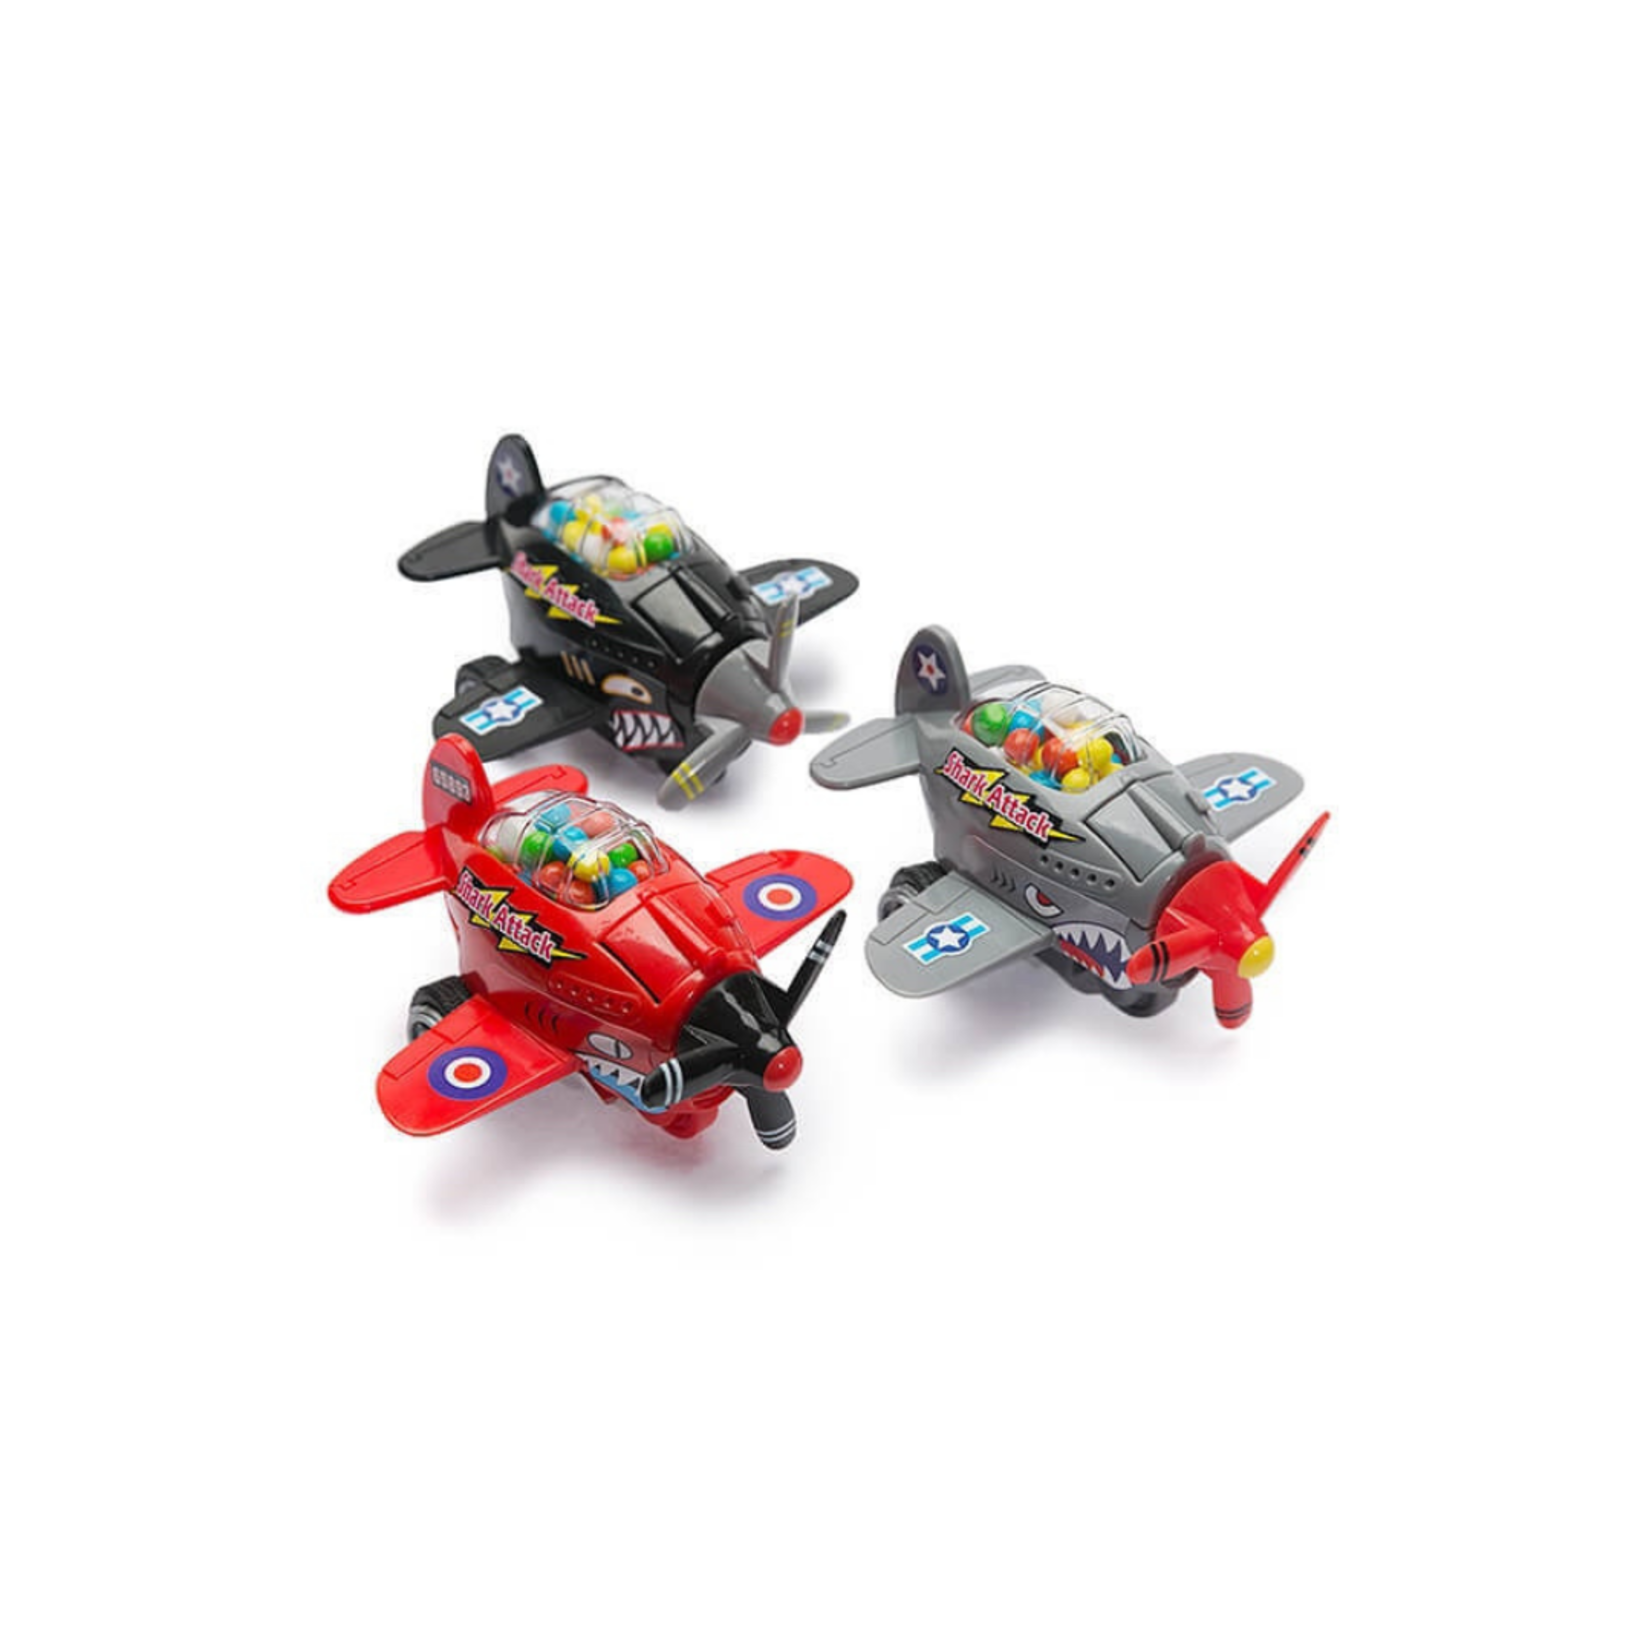 Shark Attack Plane with Candy 12ct